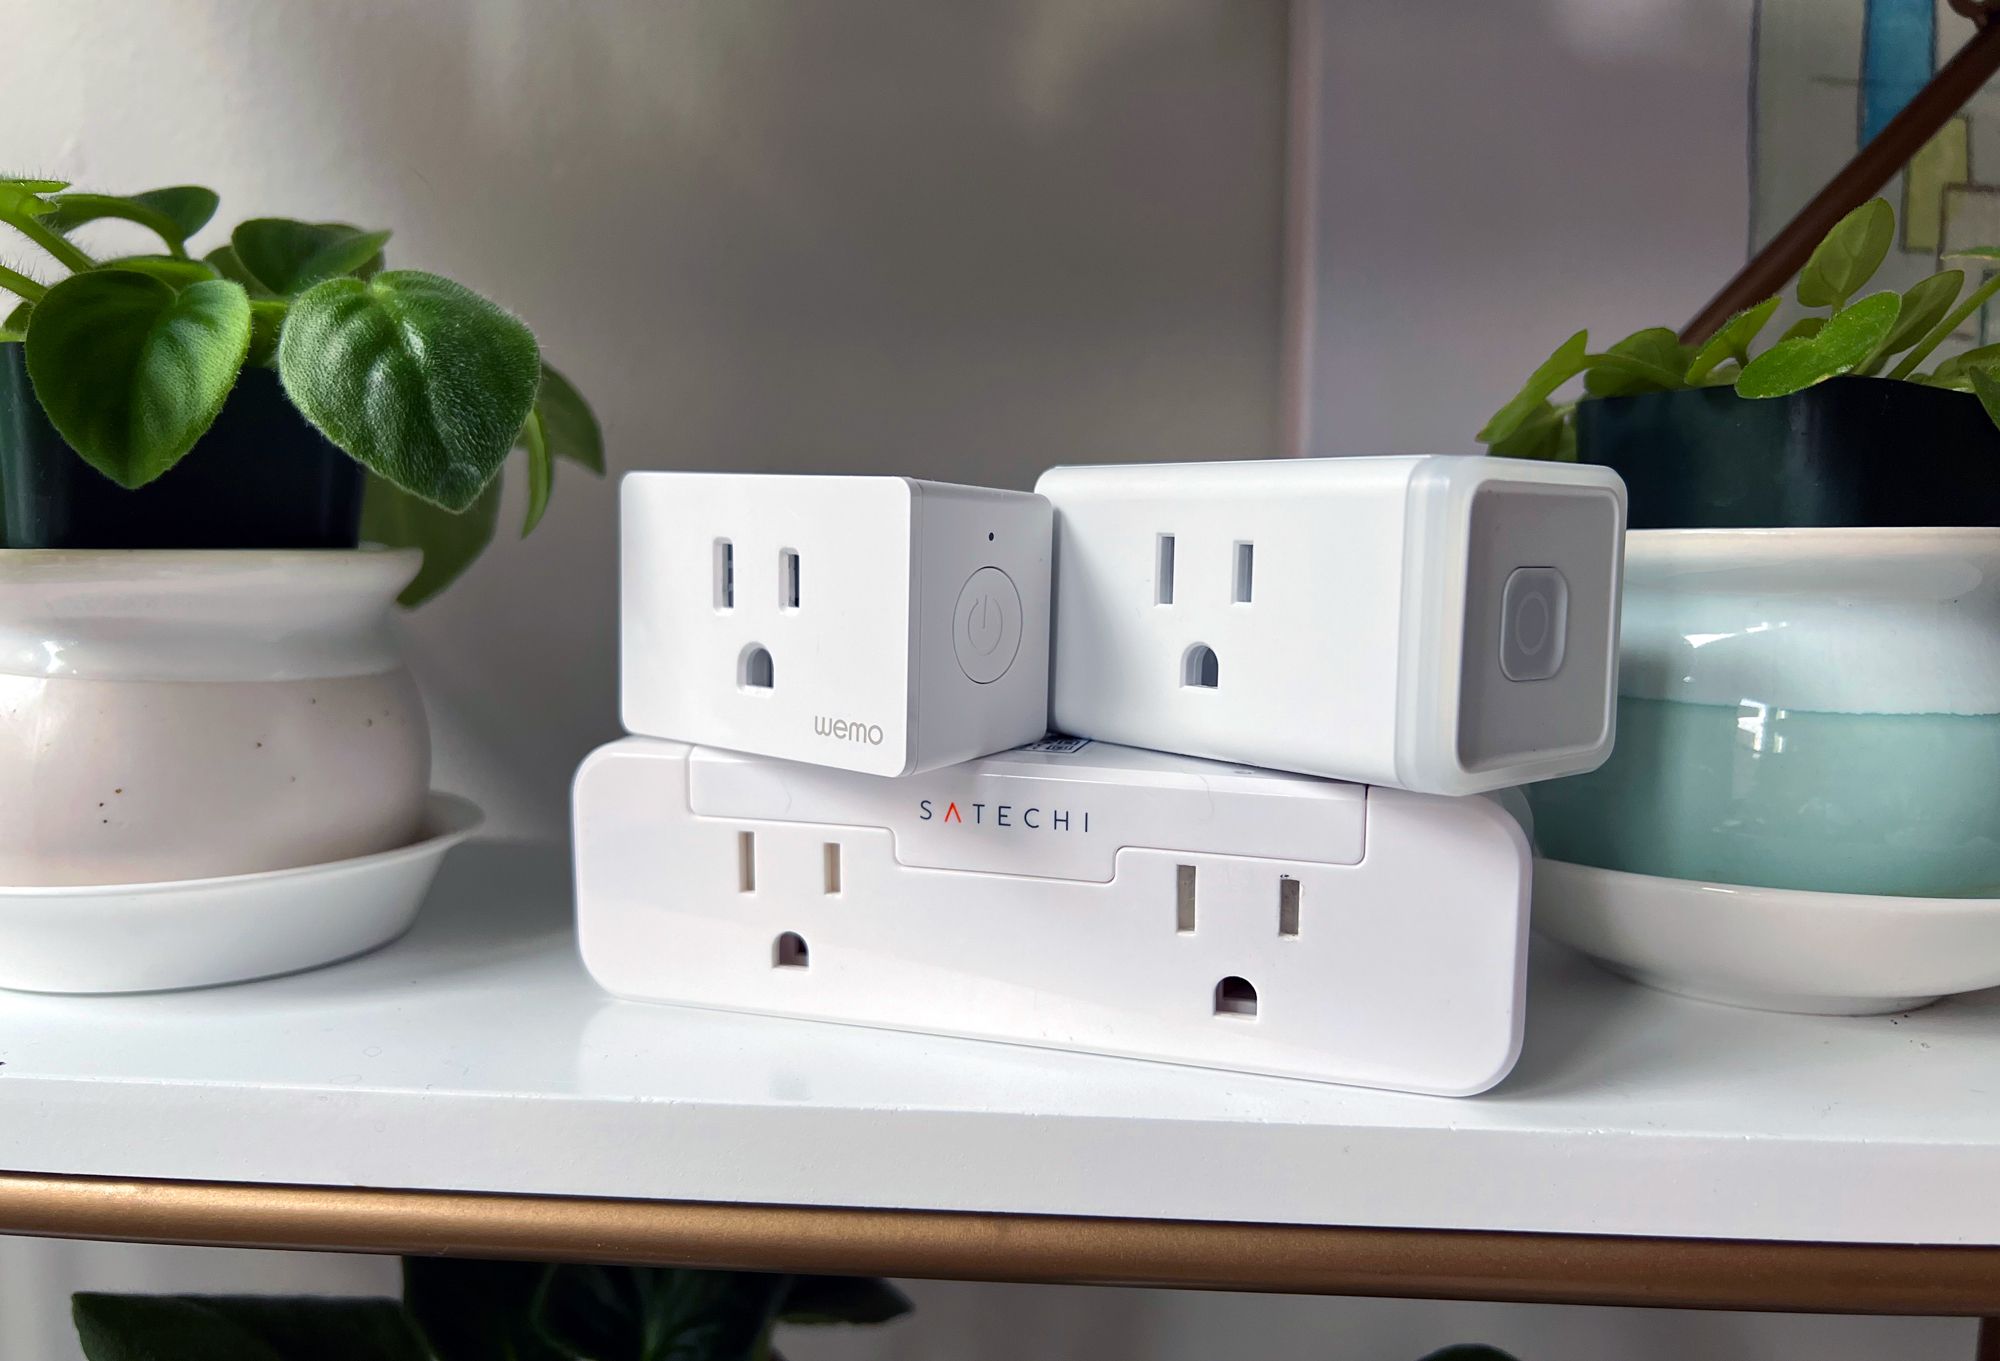 Basics Rectangular Smart Plug Power Strip, Surge Protector with 3  Individually Controlled Smart Outlets and 2 USB Ports, 2.4 GHz Wi-Fi, Works